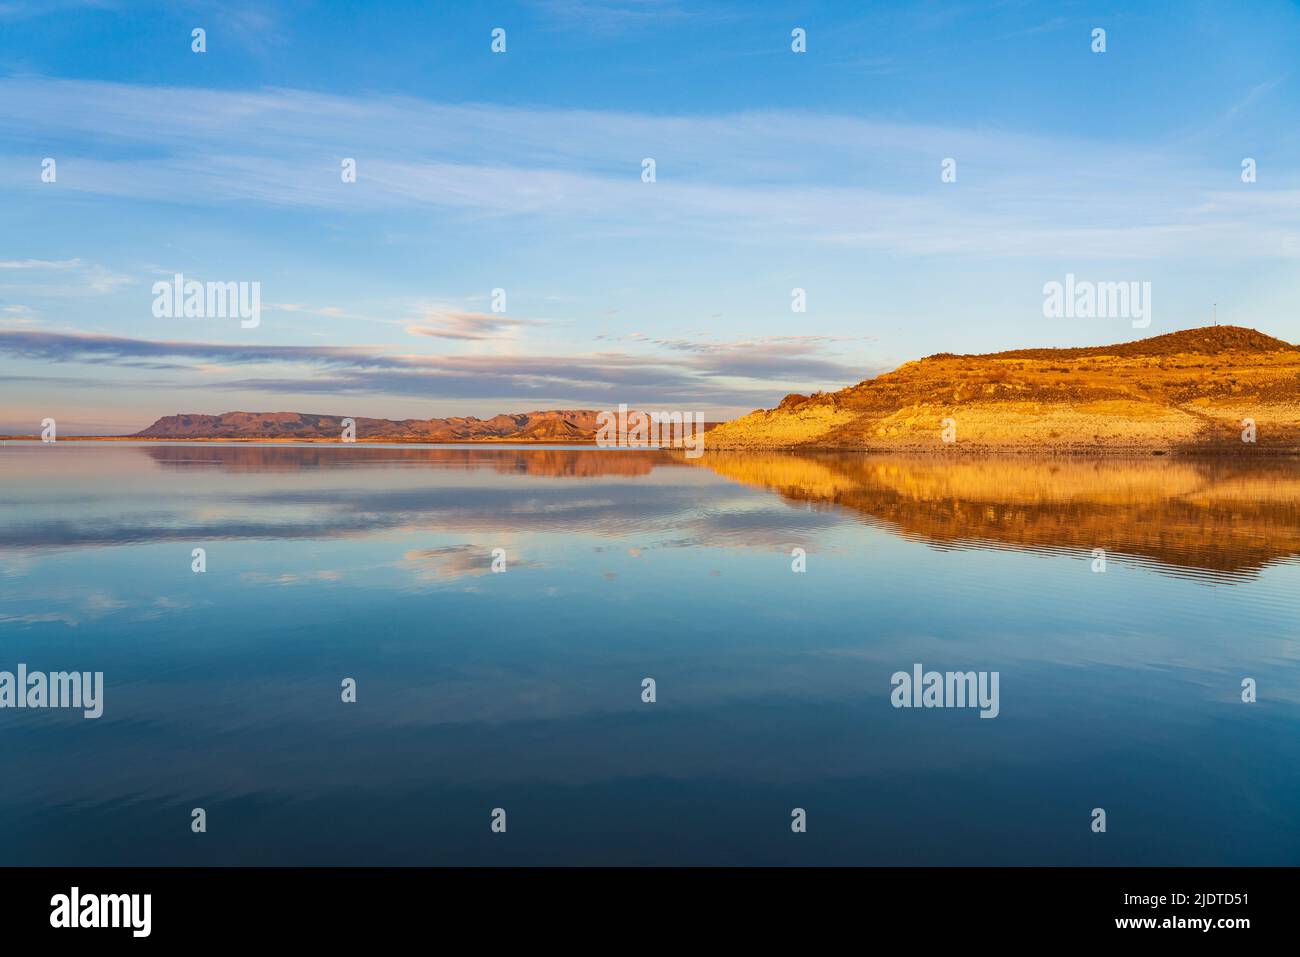 ELEPHANT BUTTE REFLECTS IN LAKE,  ELEPHANT BUTTE STATE PARK, ELEPHANT BUTTE, NEW MEXICO, USA Stock Photo